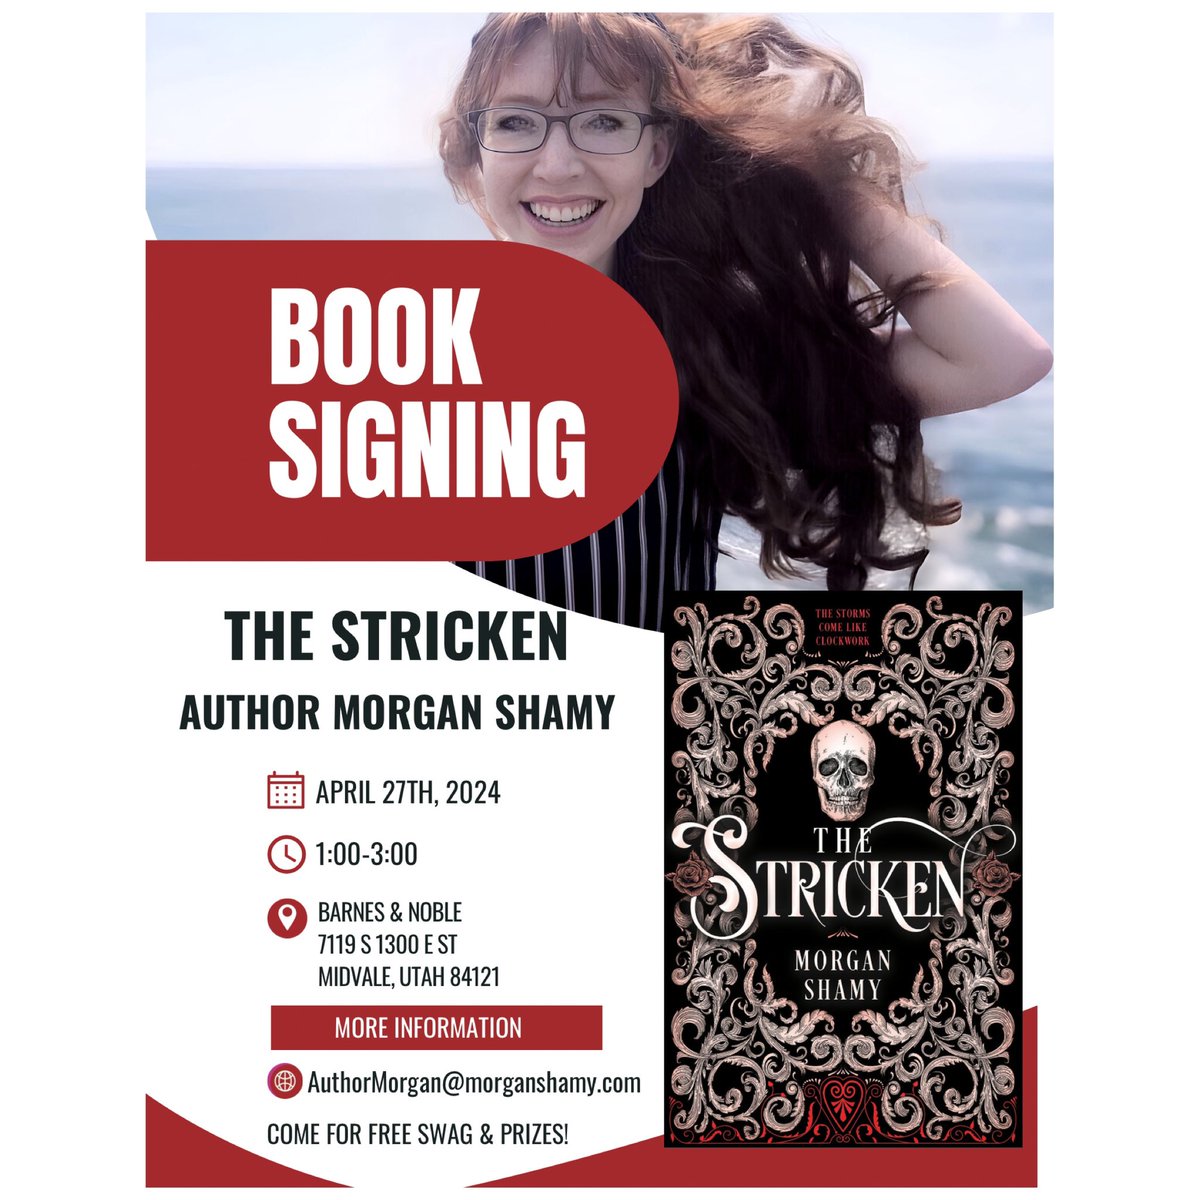 BOOK SIGNING today!! Come for free swag & prizes! Midvale location 1:00-3:00!! 💀📚💀📚💀📚